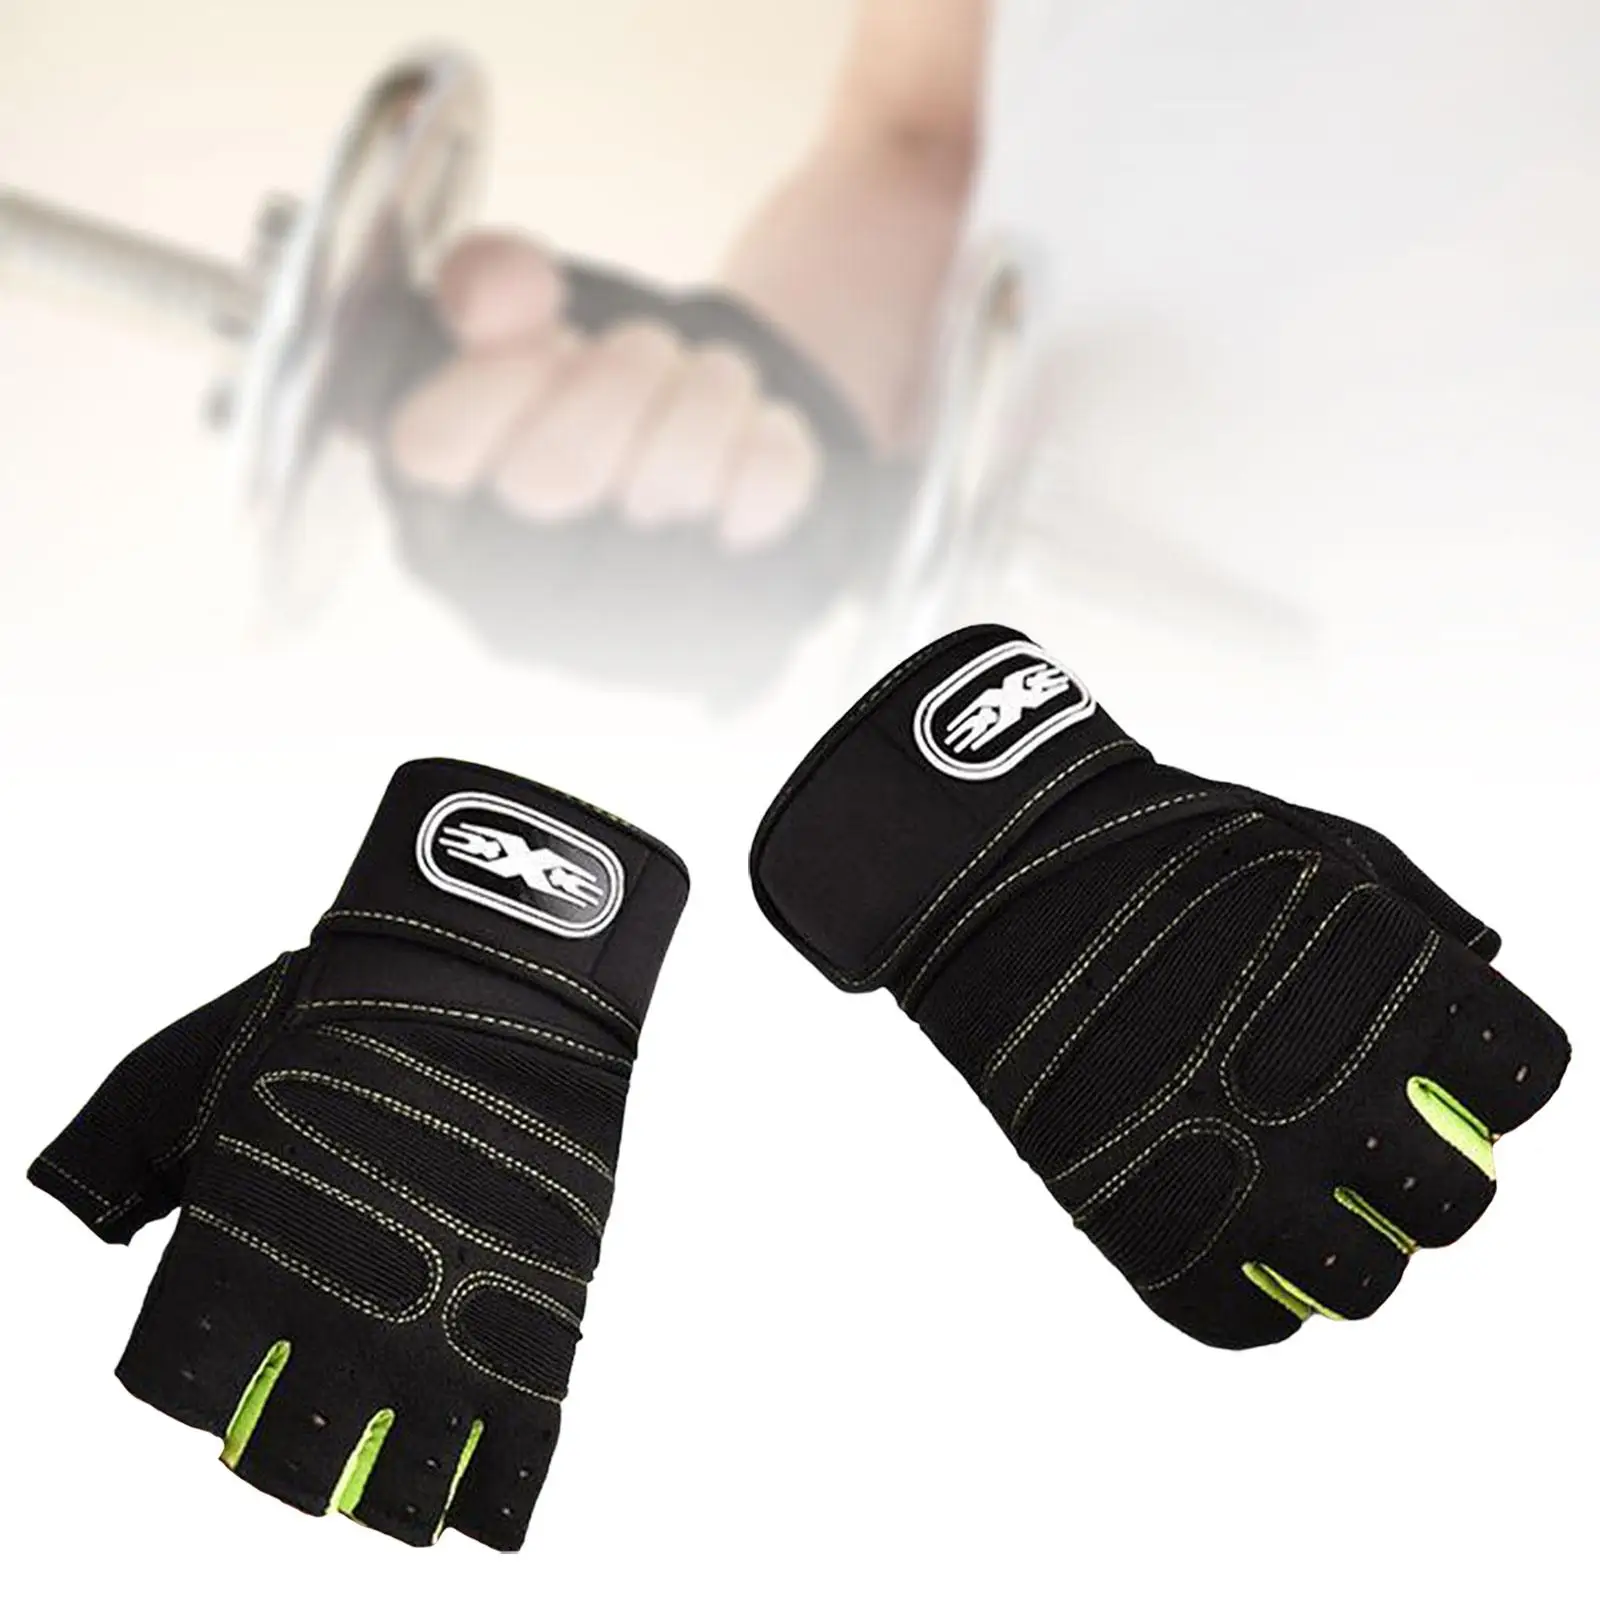 Gym Gloves Palm Protection Breathable Weight Lifting Gloves for Men Women for Bodybuilding Exercise Cycling Fitness Training